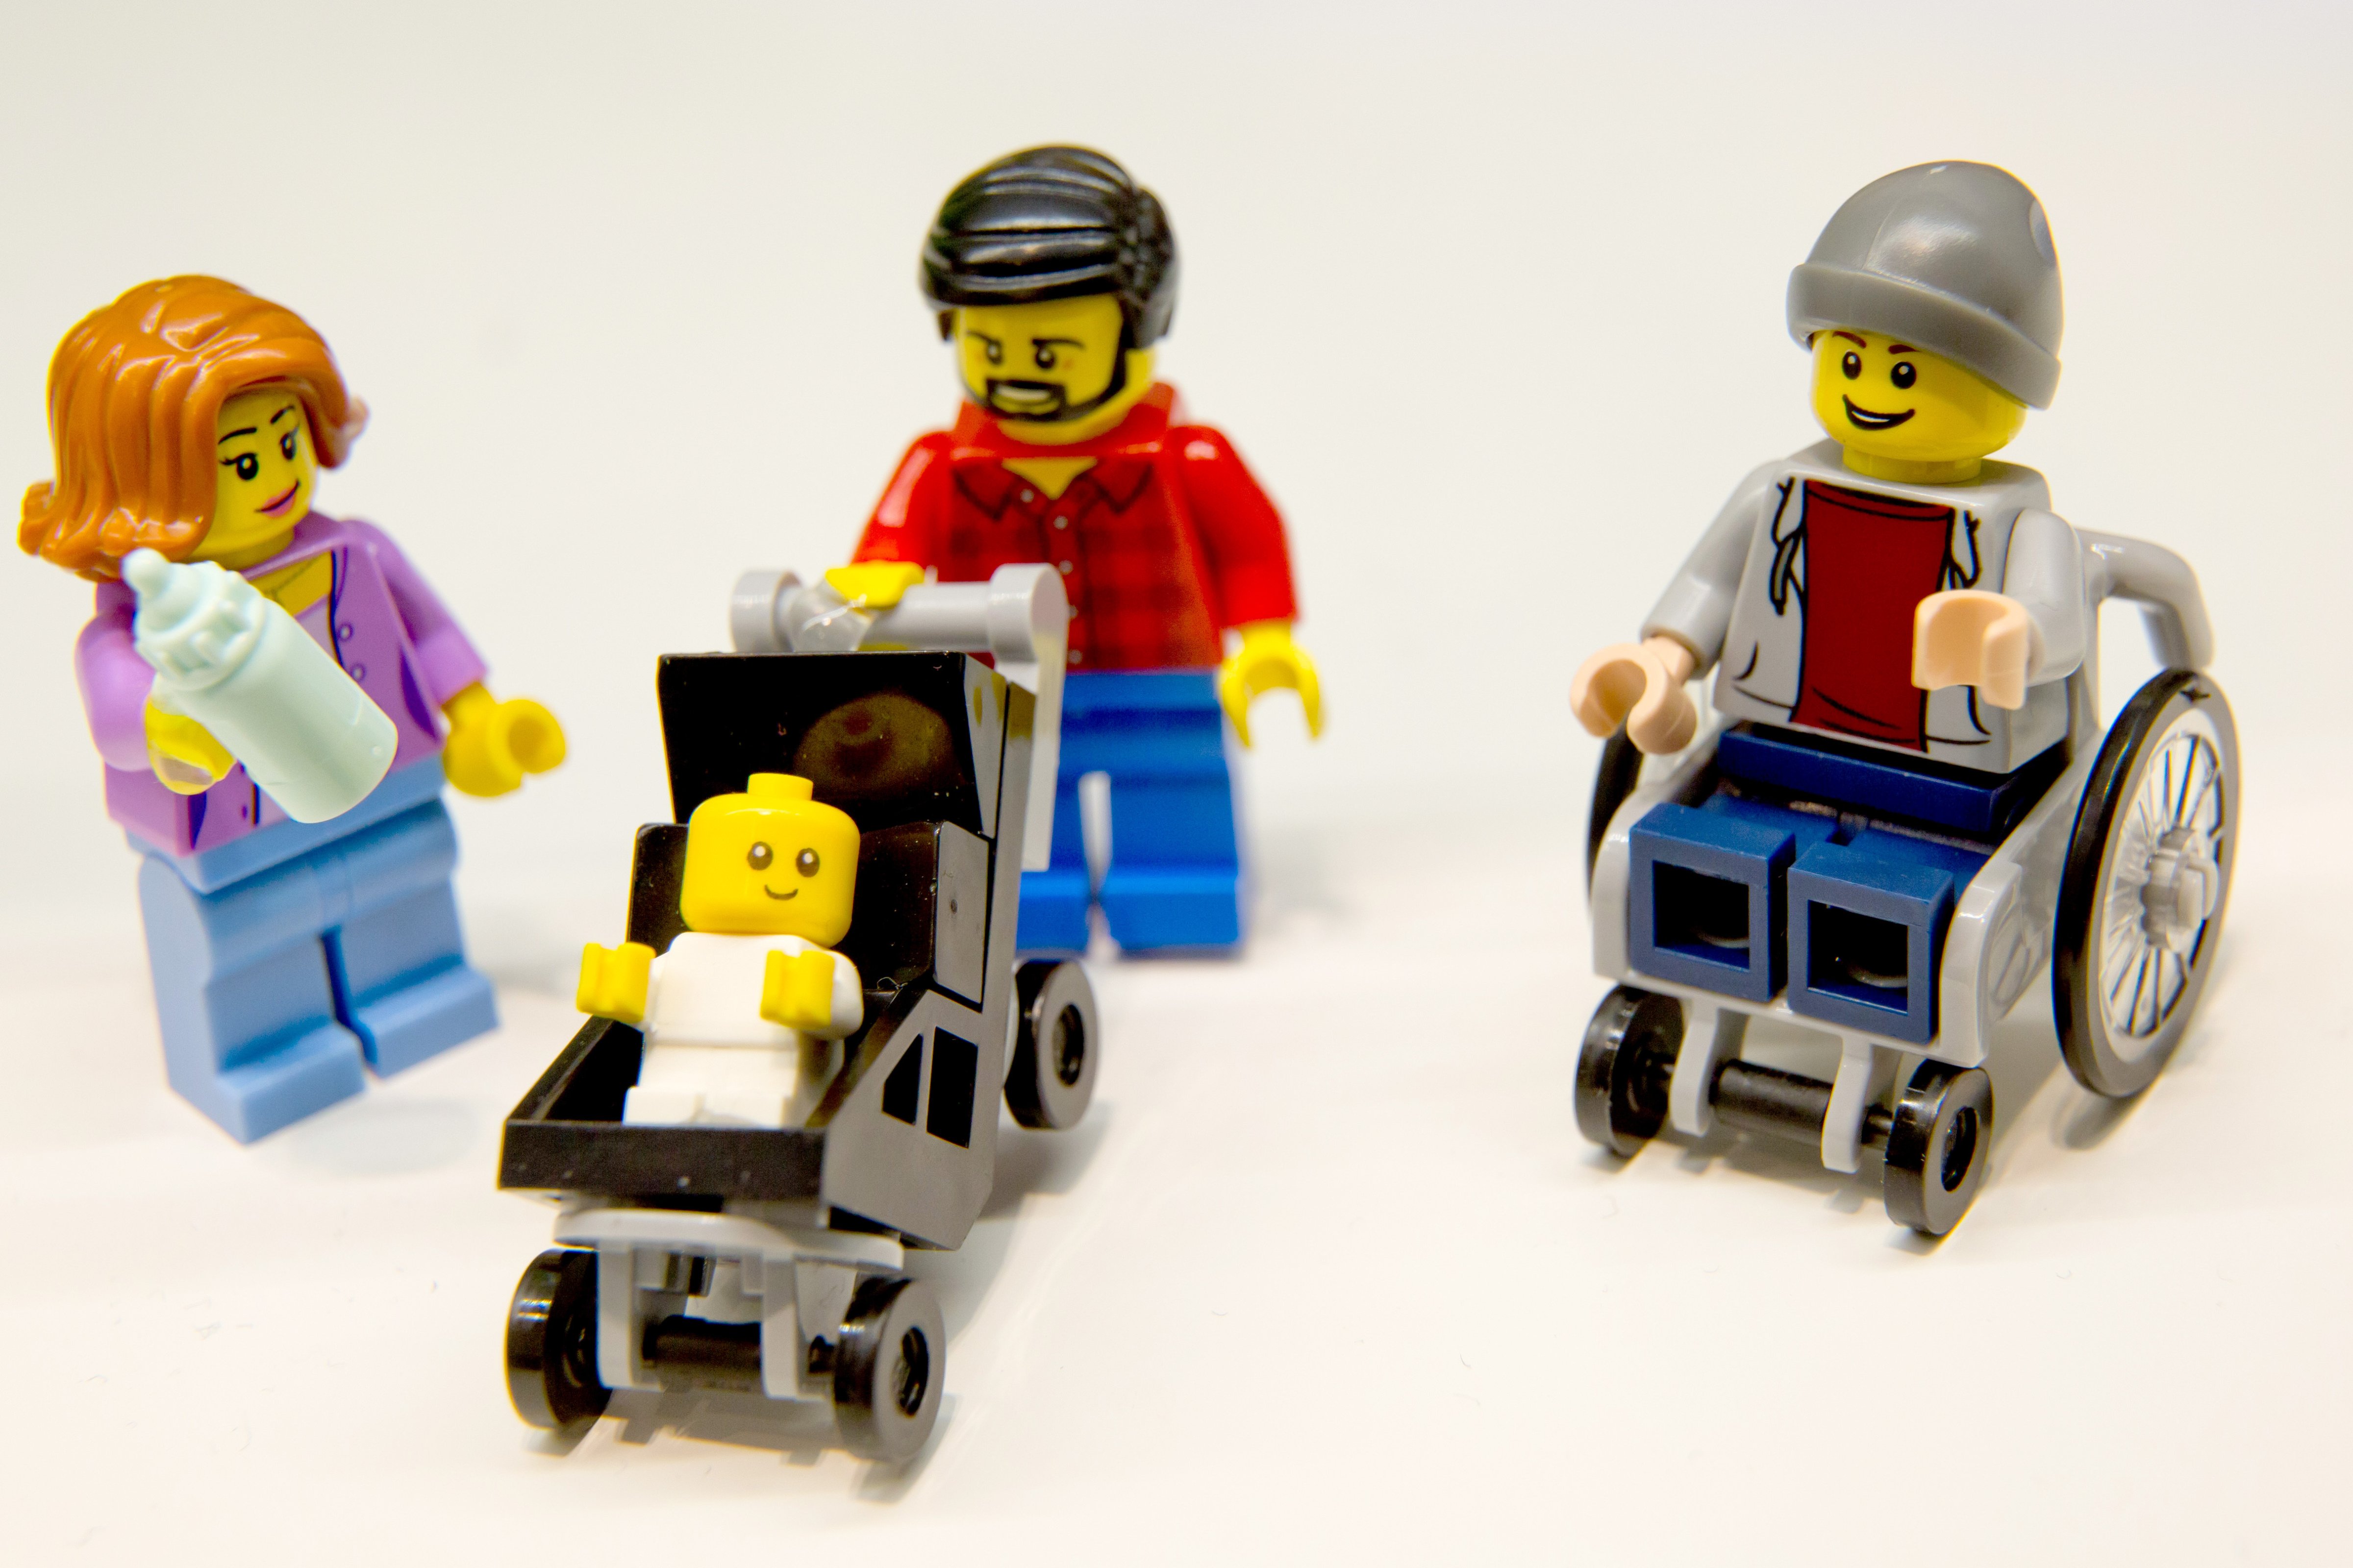 Lego figurines, including one in a wheelchair are pictured at the Lego booth on January 28, 2016 in Nuernberg during the 67th International Toy Fair. (Daniel Karmann&mdash;AFP/Getty Images)